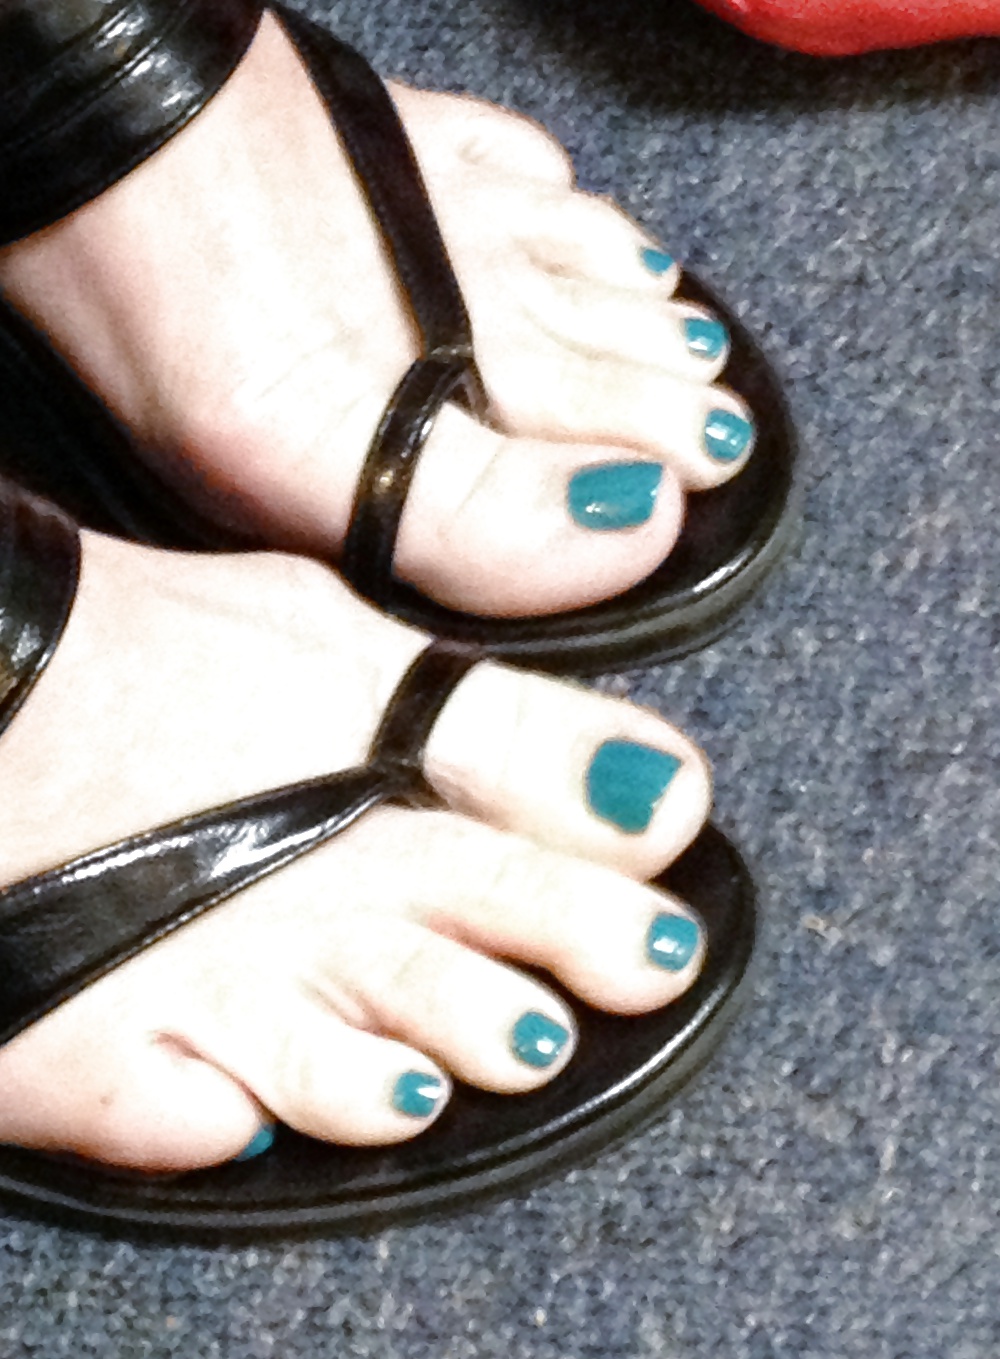 Wife's blue toes #25679706